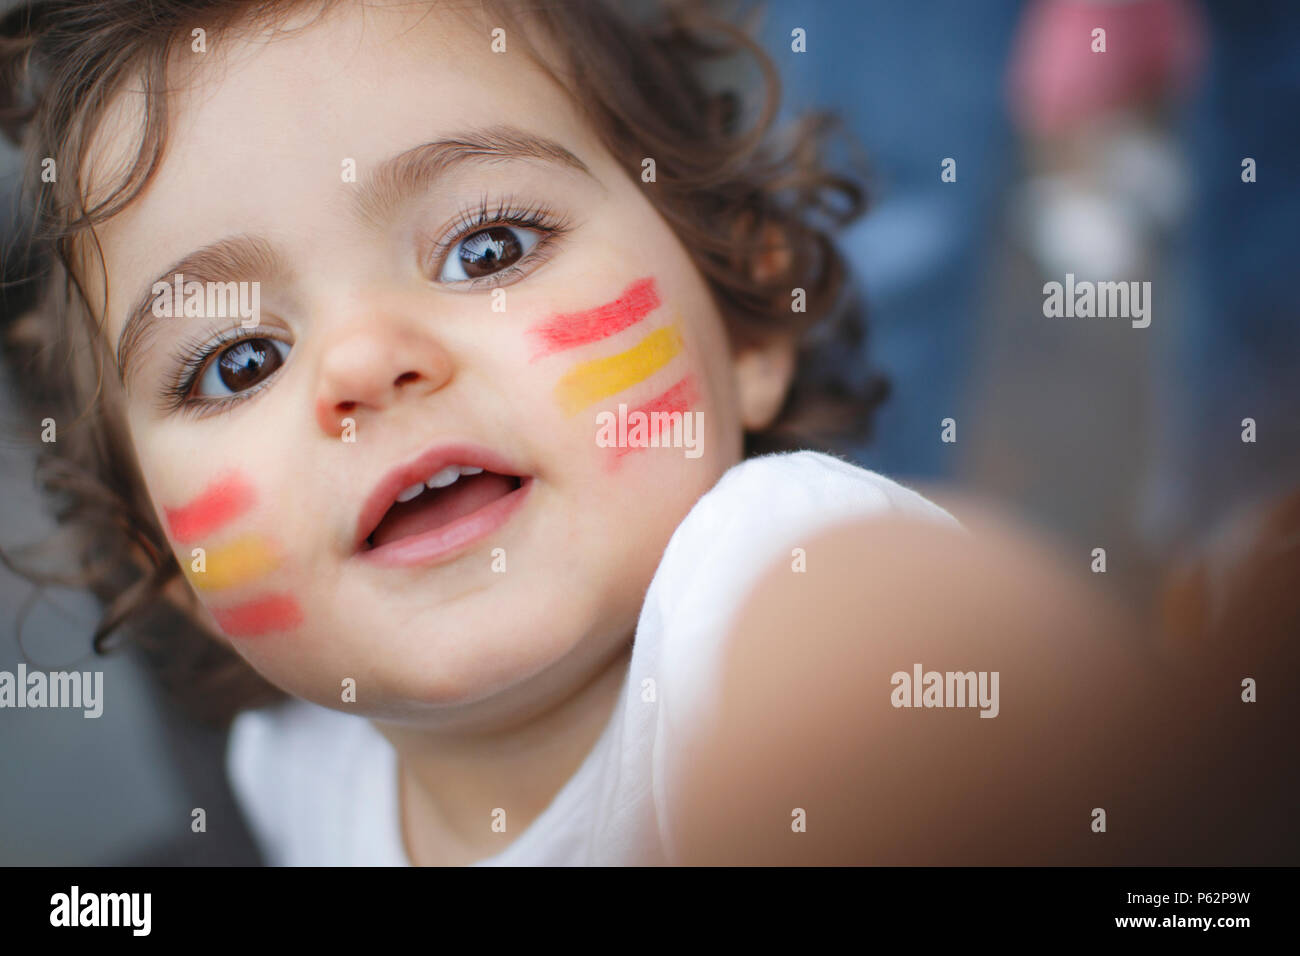 Kid fan with spanish flag painted on face Stock Photo